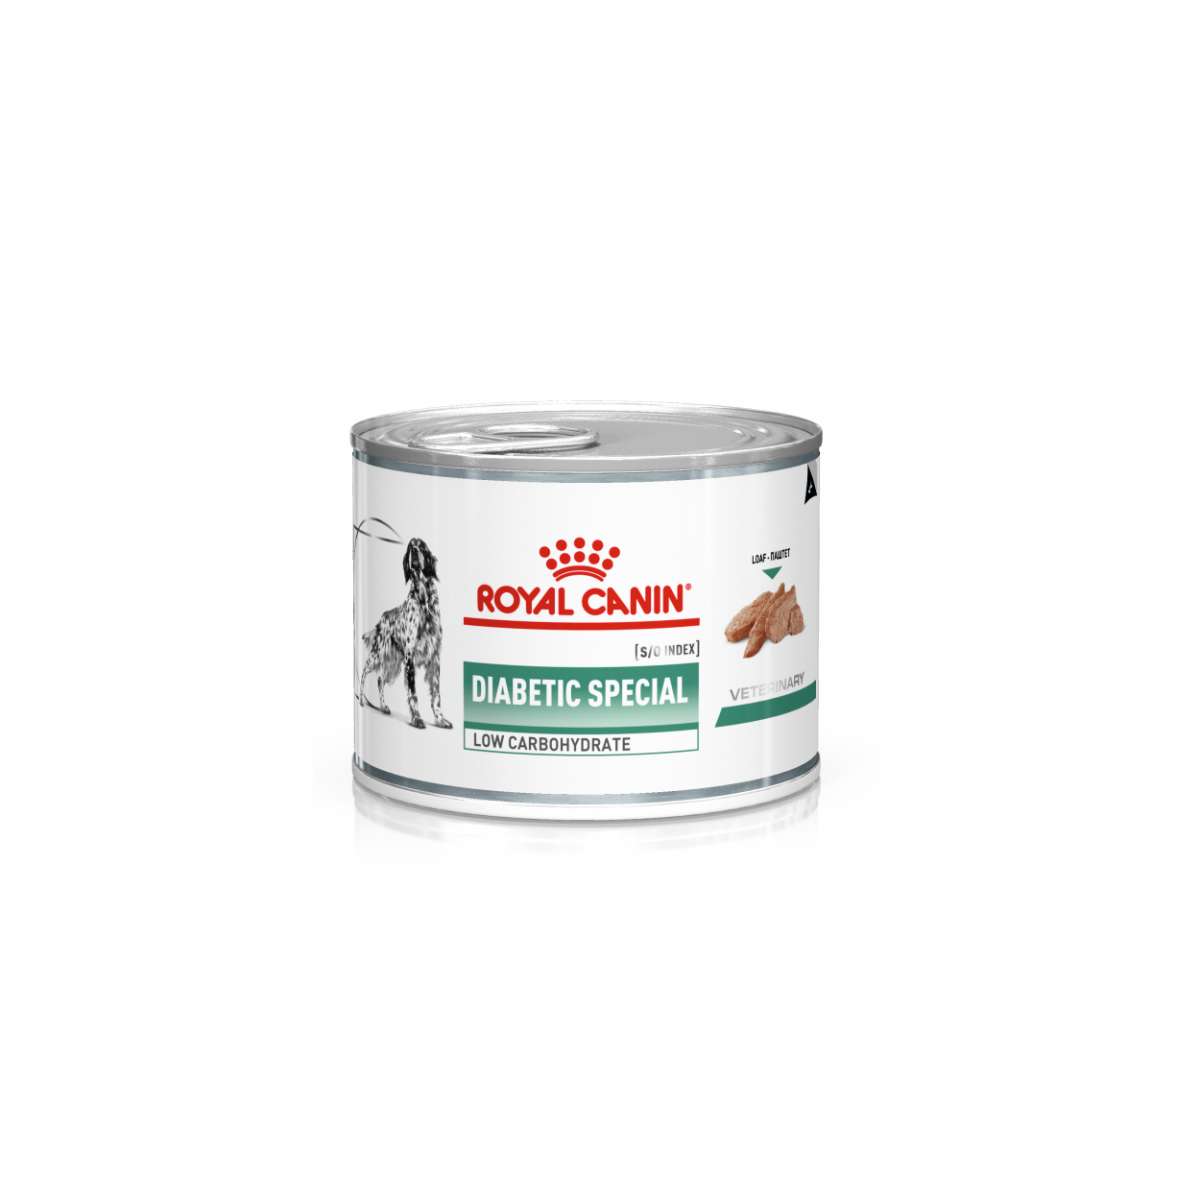 Royal Canin Hund Diabetic special low 12x195g Dosenfutter